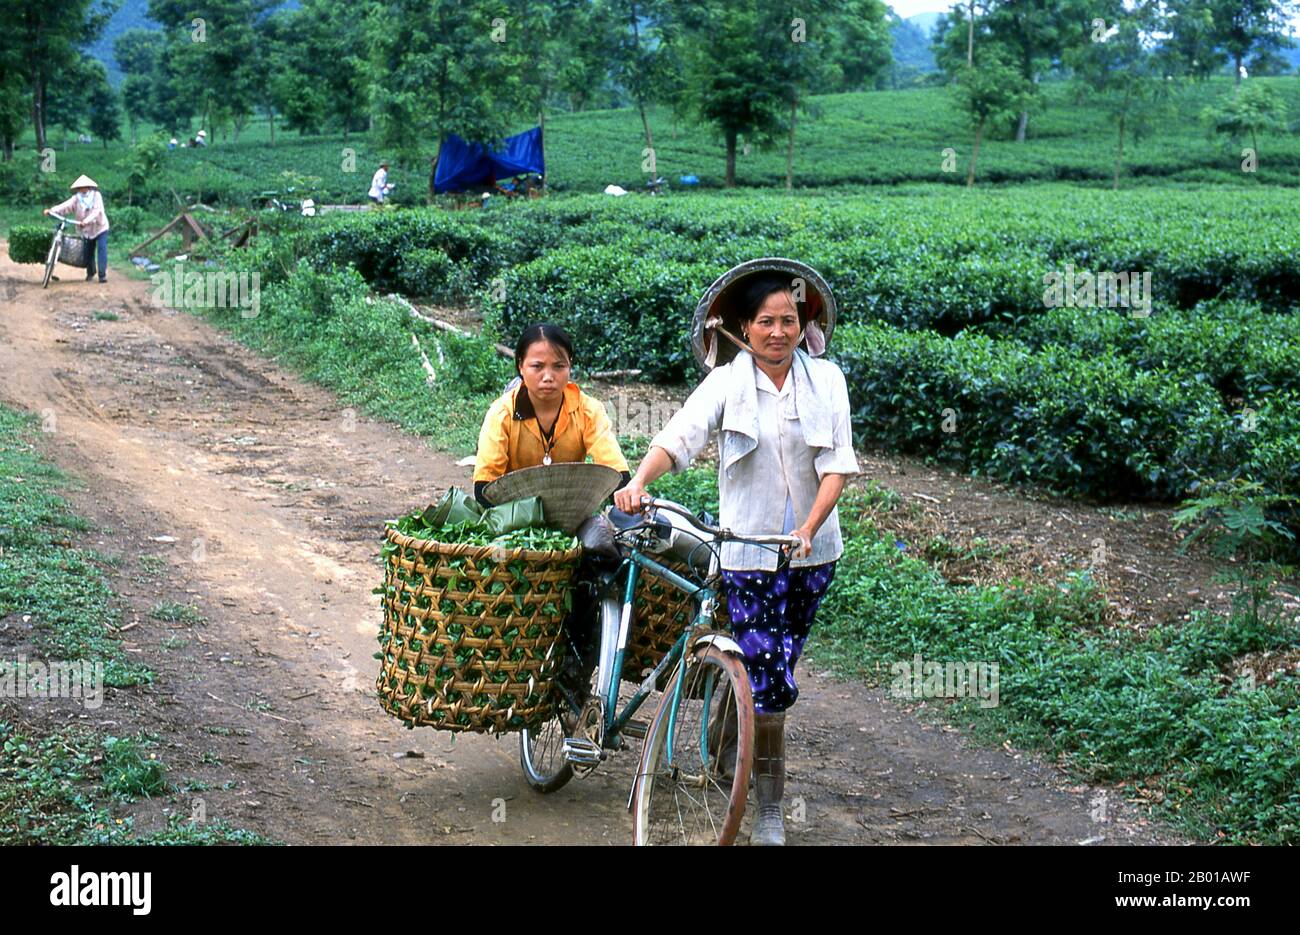 Vietnam: Transporting freshly picked tea leaves, tea plantation near Thanh Son, Phu Tho Province, northwest Vietnam.  According to oral tradition, tea has been grown in China for more than four millennia. The earliest written accounts of tea making, however, date from around 350 CE, when it first became a drink at the imperial court.    Around 800 CE tea seeds were taken to Japan, where regular cultivation was soon established. Just over five centuries later, in 1517, tea was first shipped to Europe by the Portuguese soon after they began their trade with China. Stock Photo